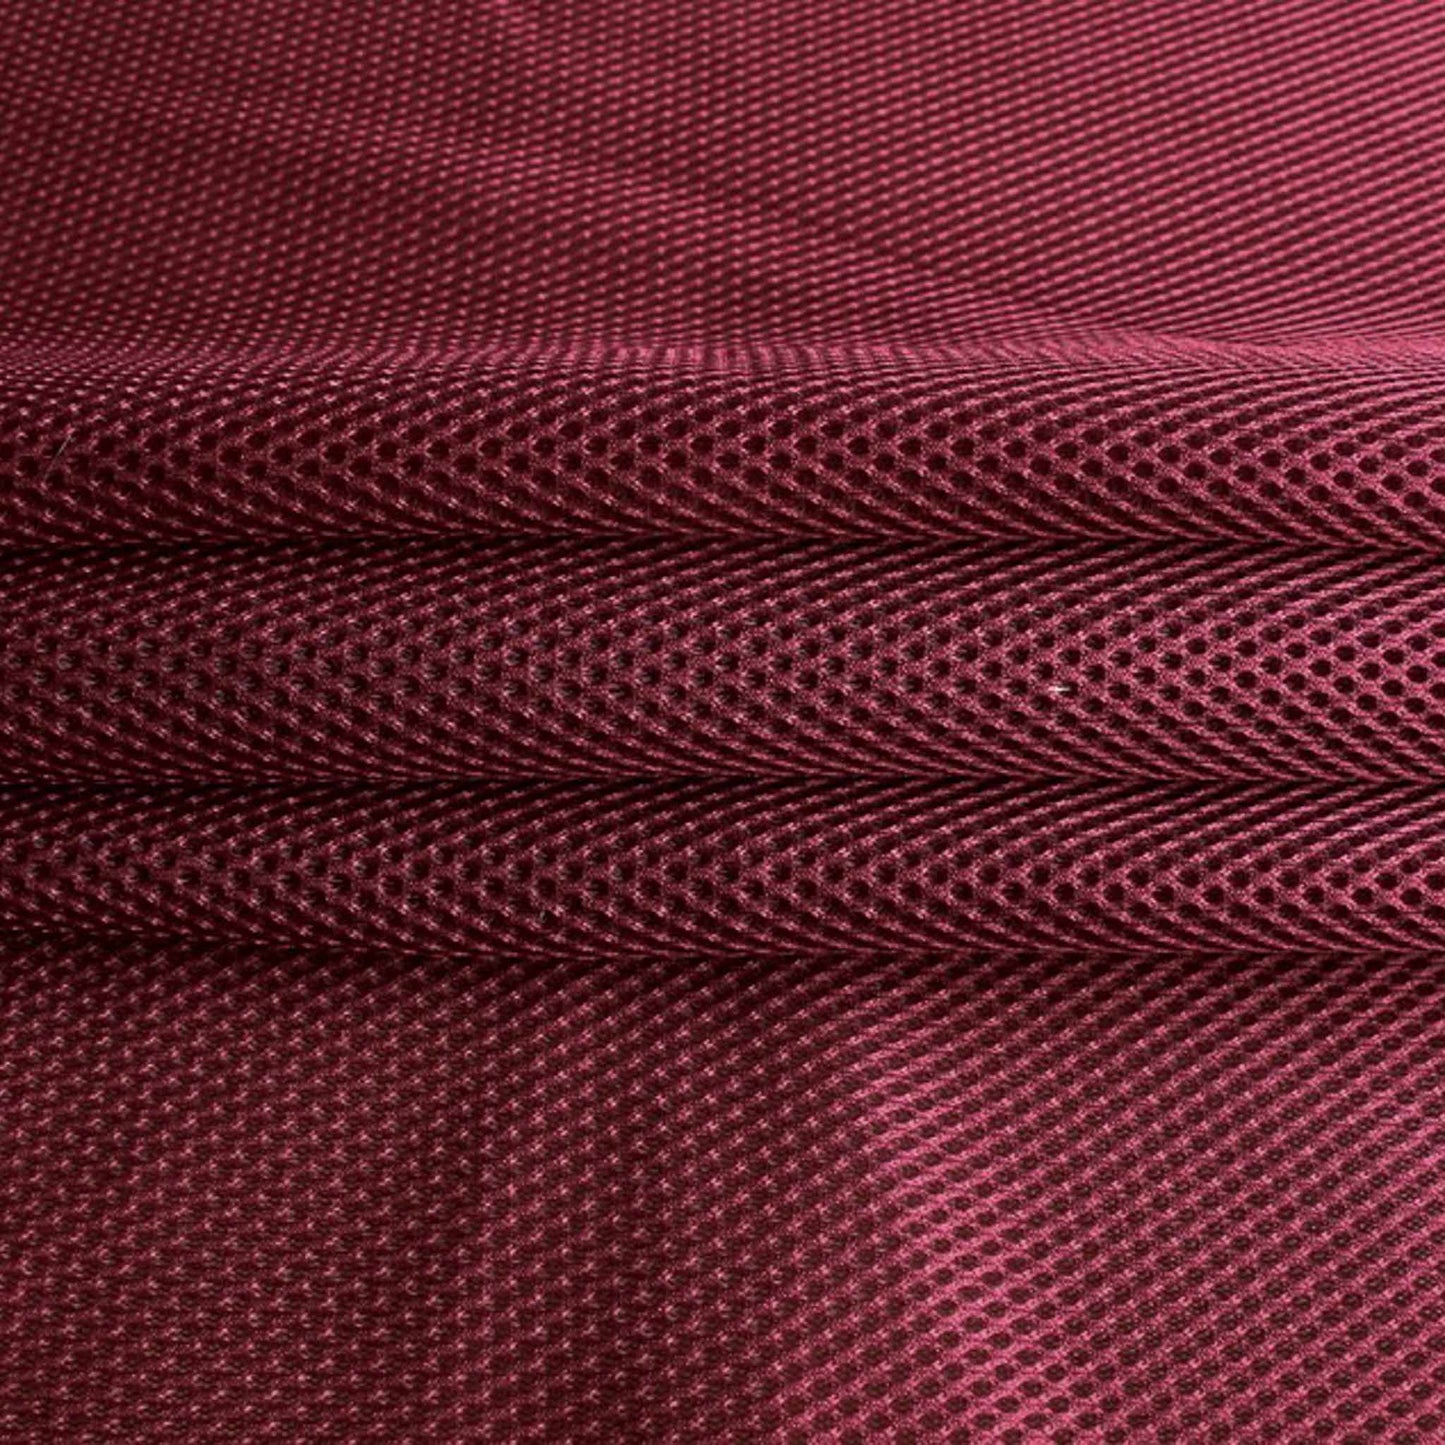 maroon airtesh mesh 3D spacer sports fabric for dressmaking